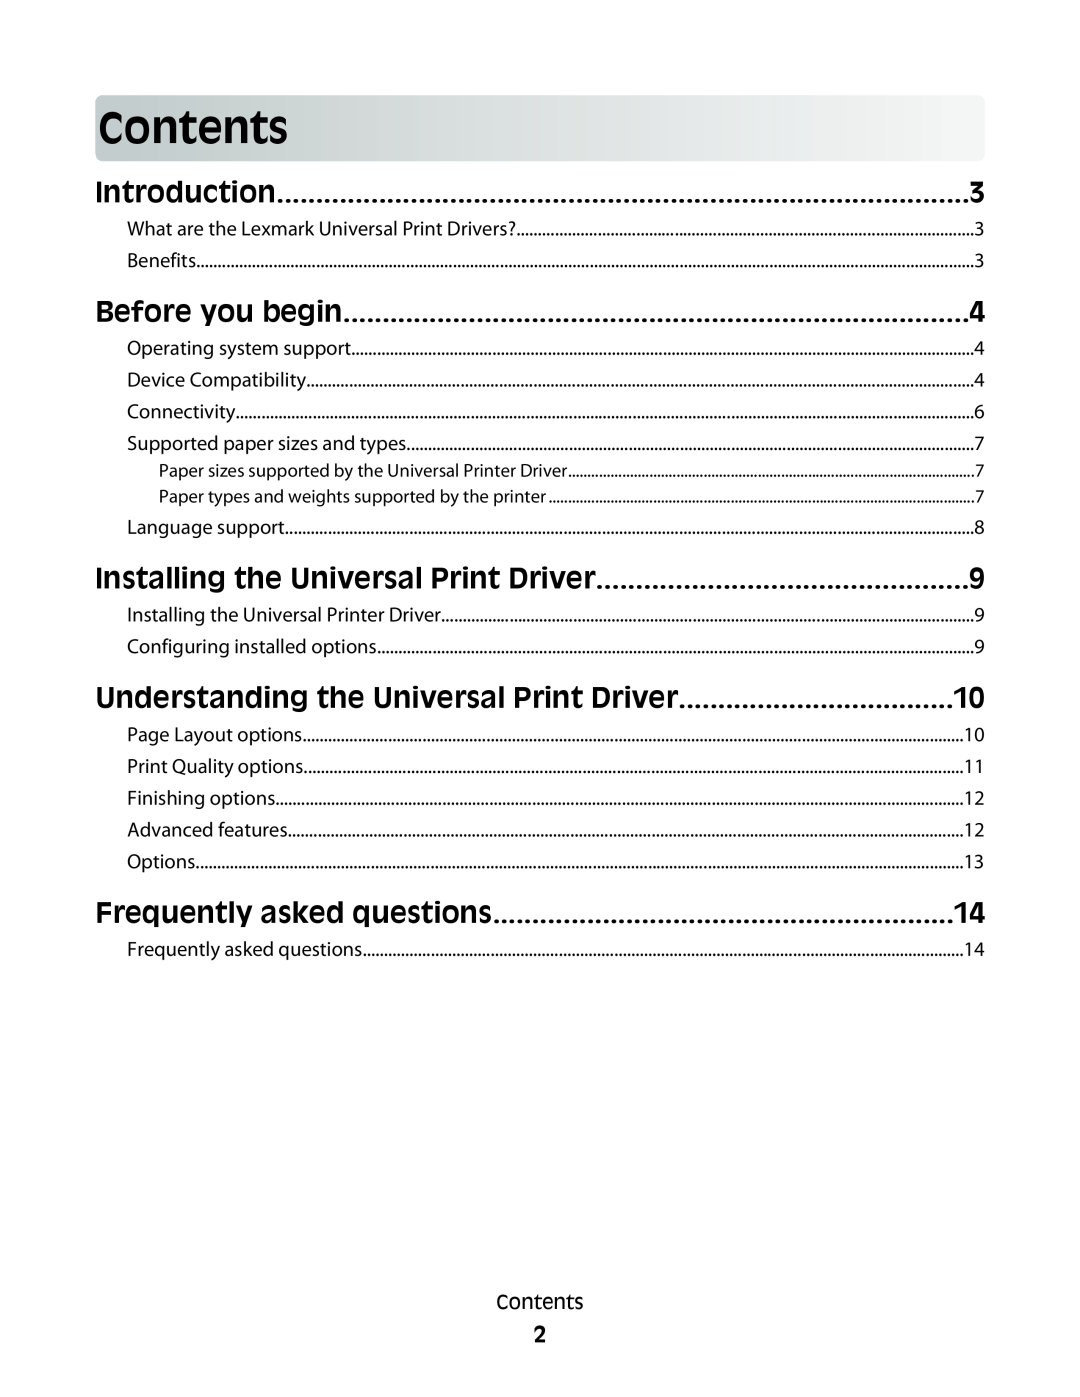 Lexmark Universal Driver manual Contents, Introduction, Before you begin, Installing the Universal Print Driver 